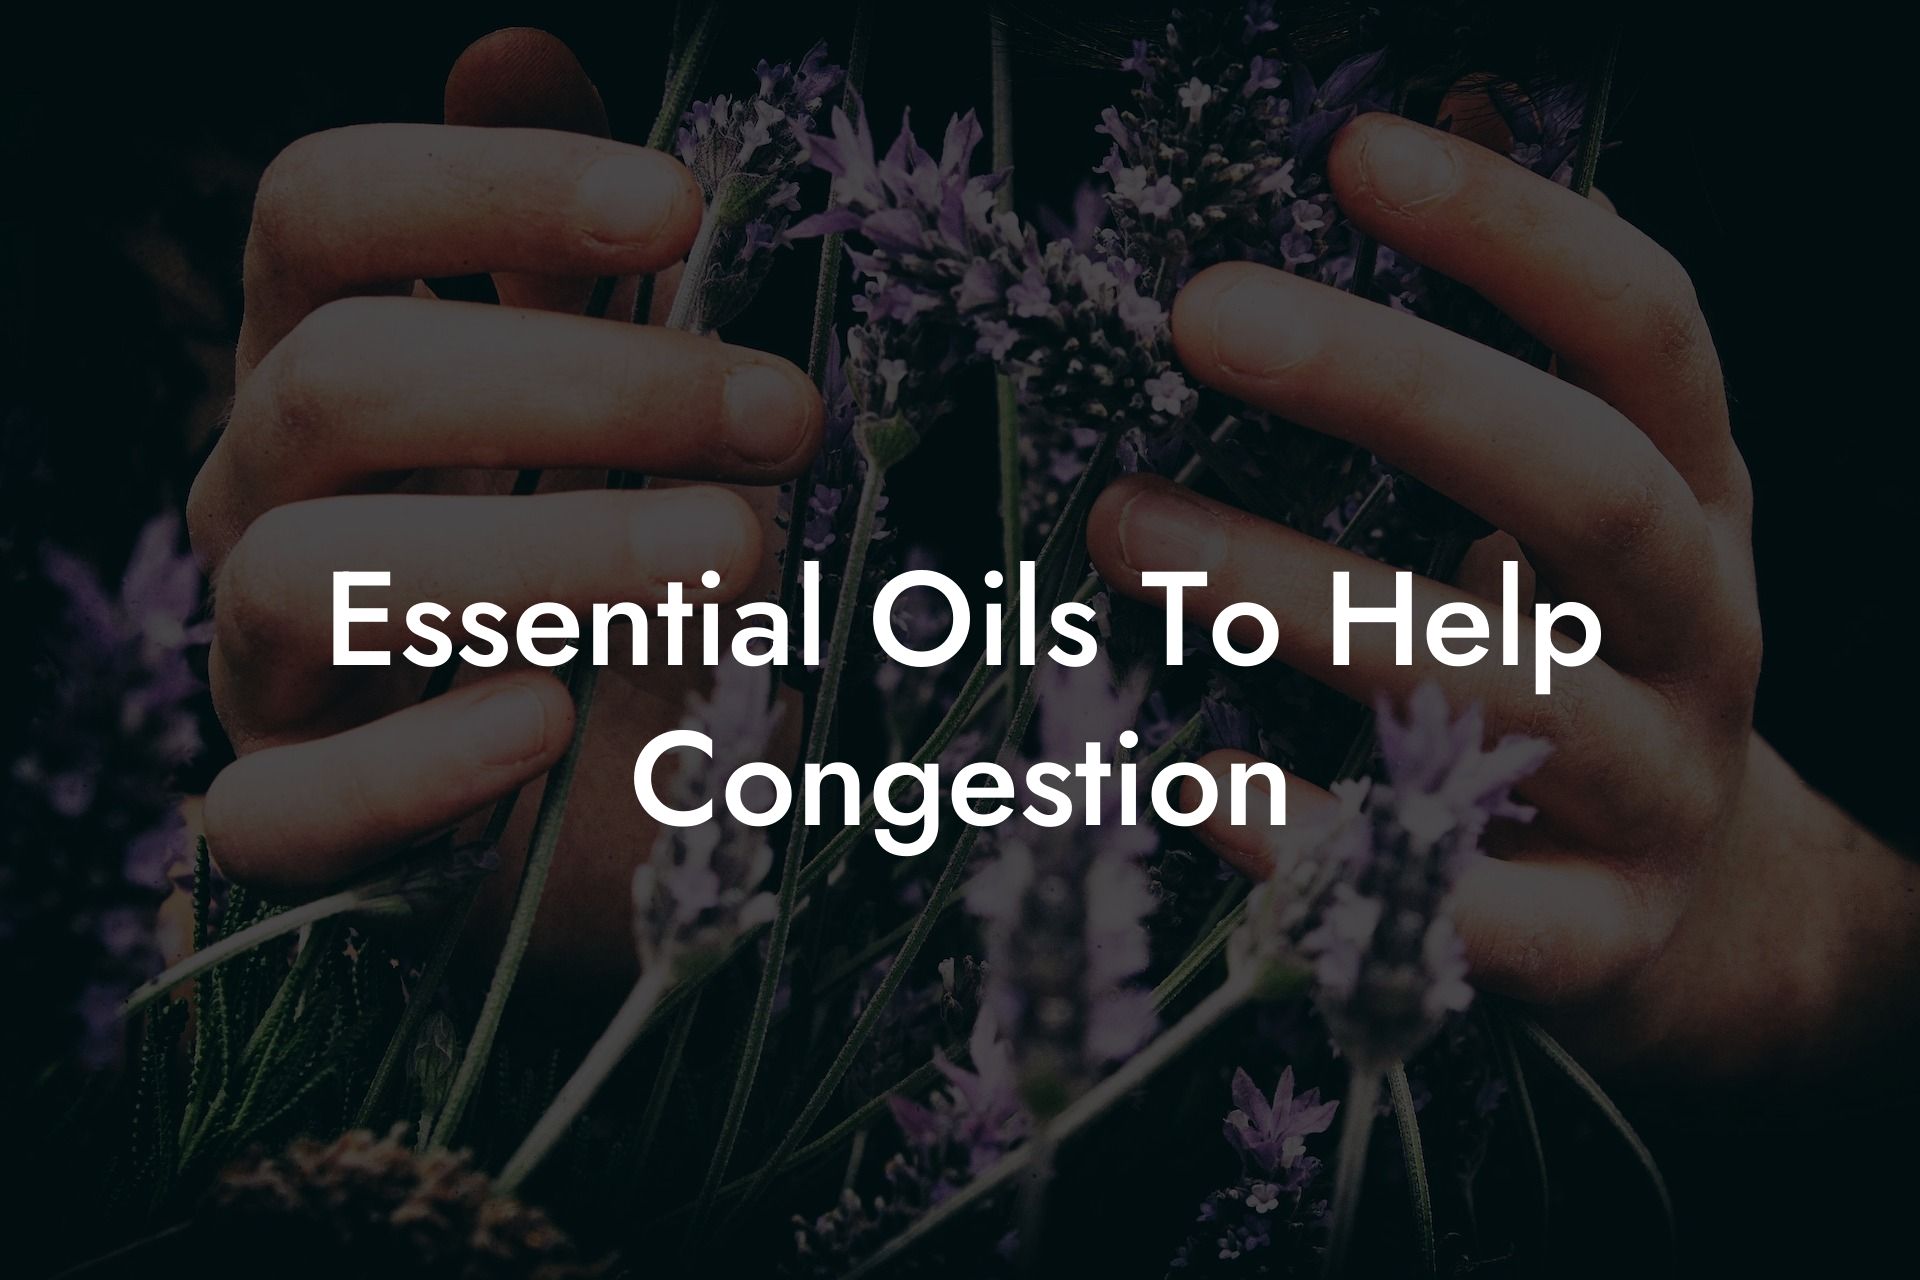 Essential Oils To Help Congestion